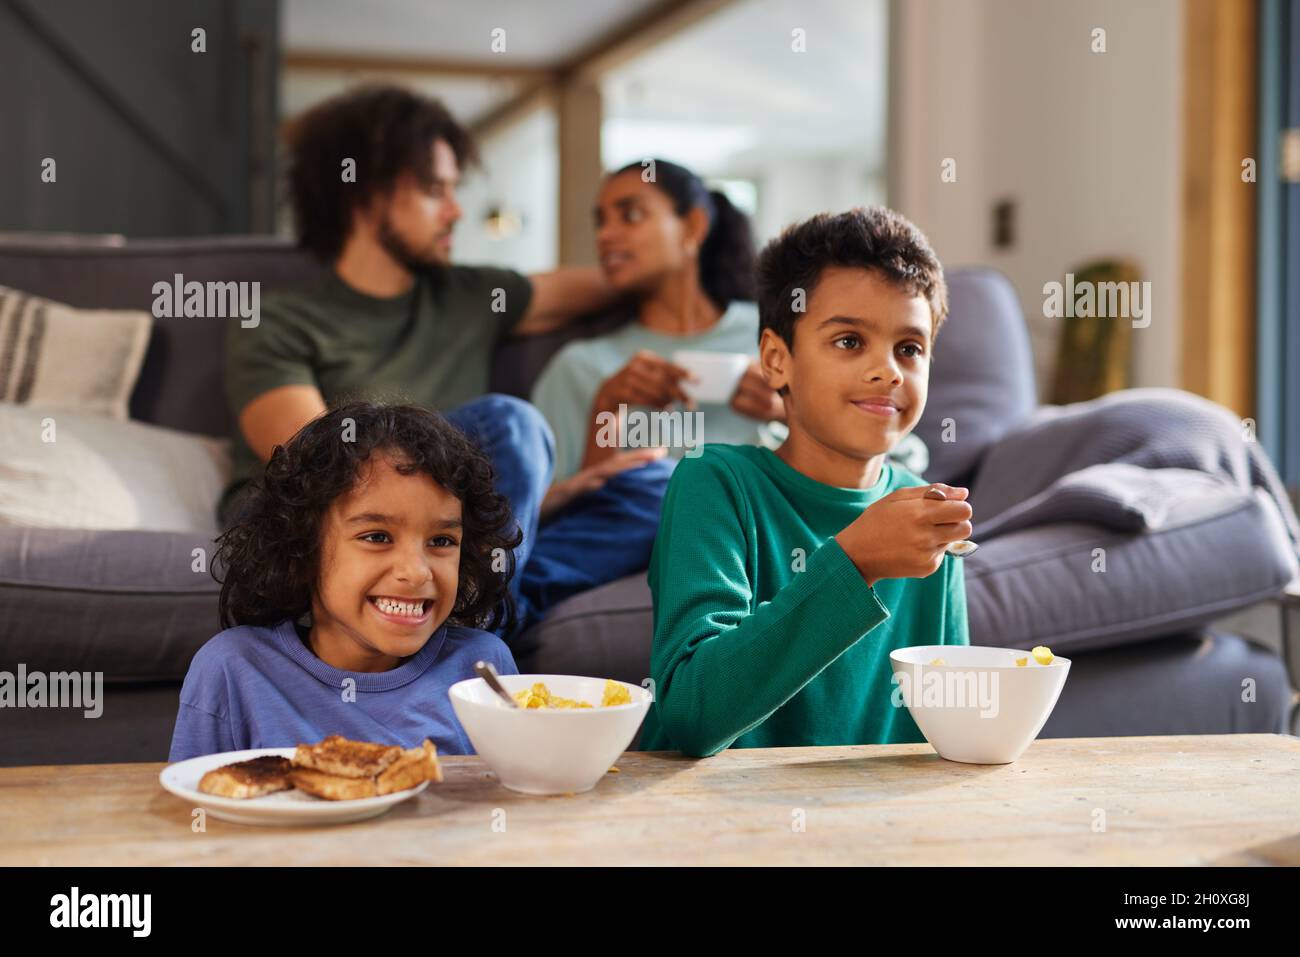 Children watching TV eating breakfast with parents Stock Photo